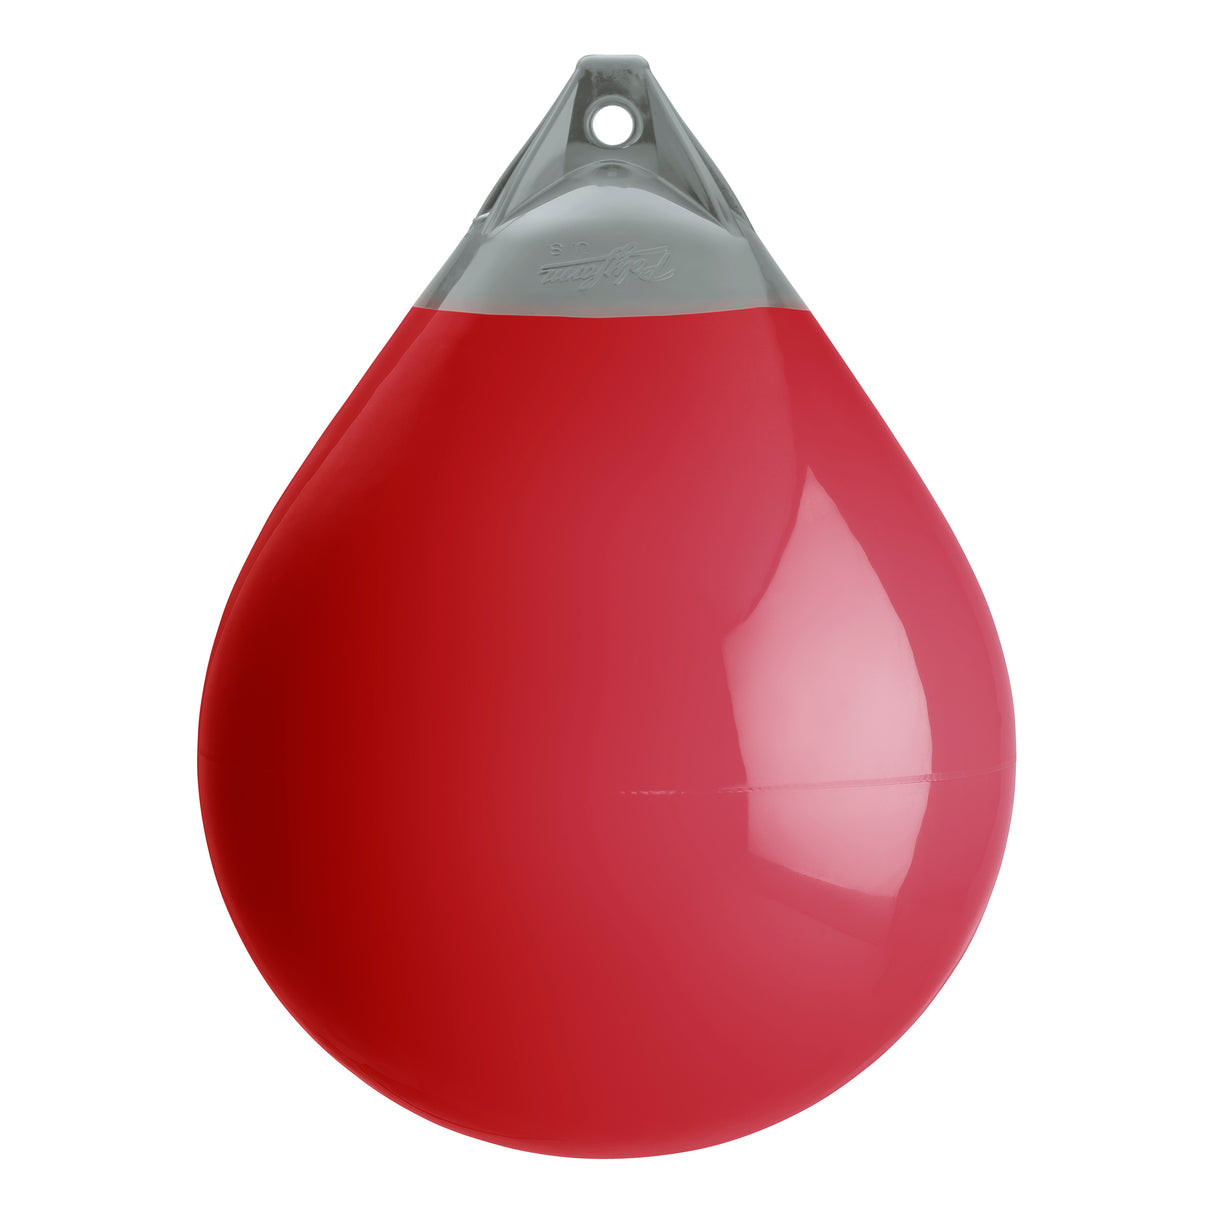 Classic Red buoy with Grey-Top, Polyform A-5